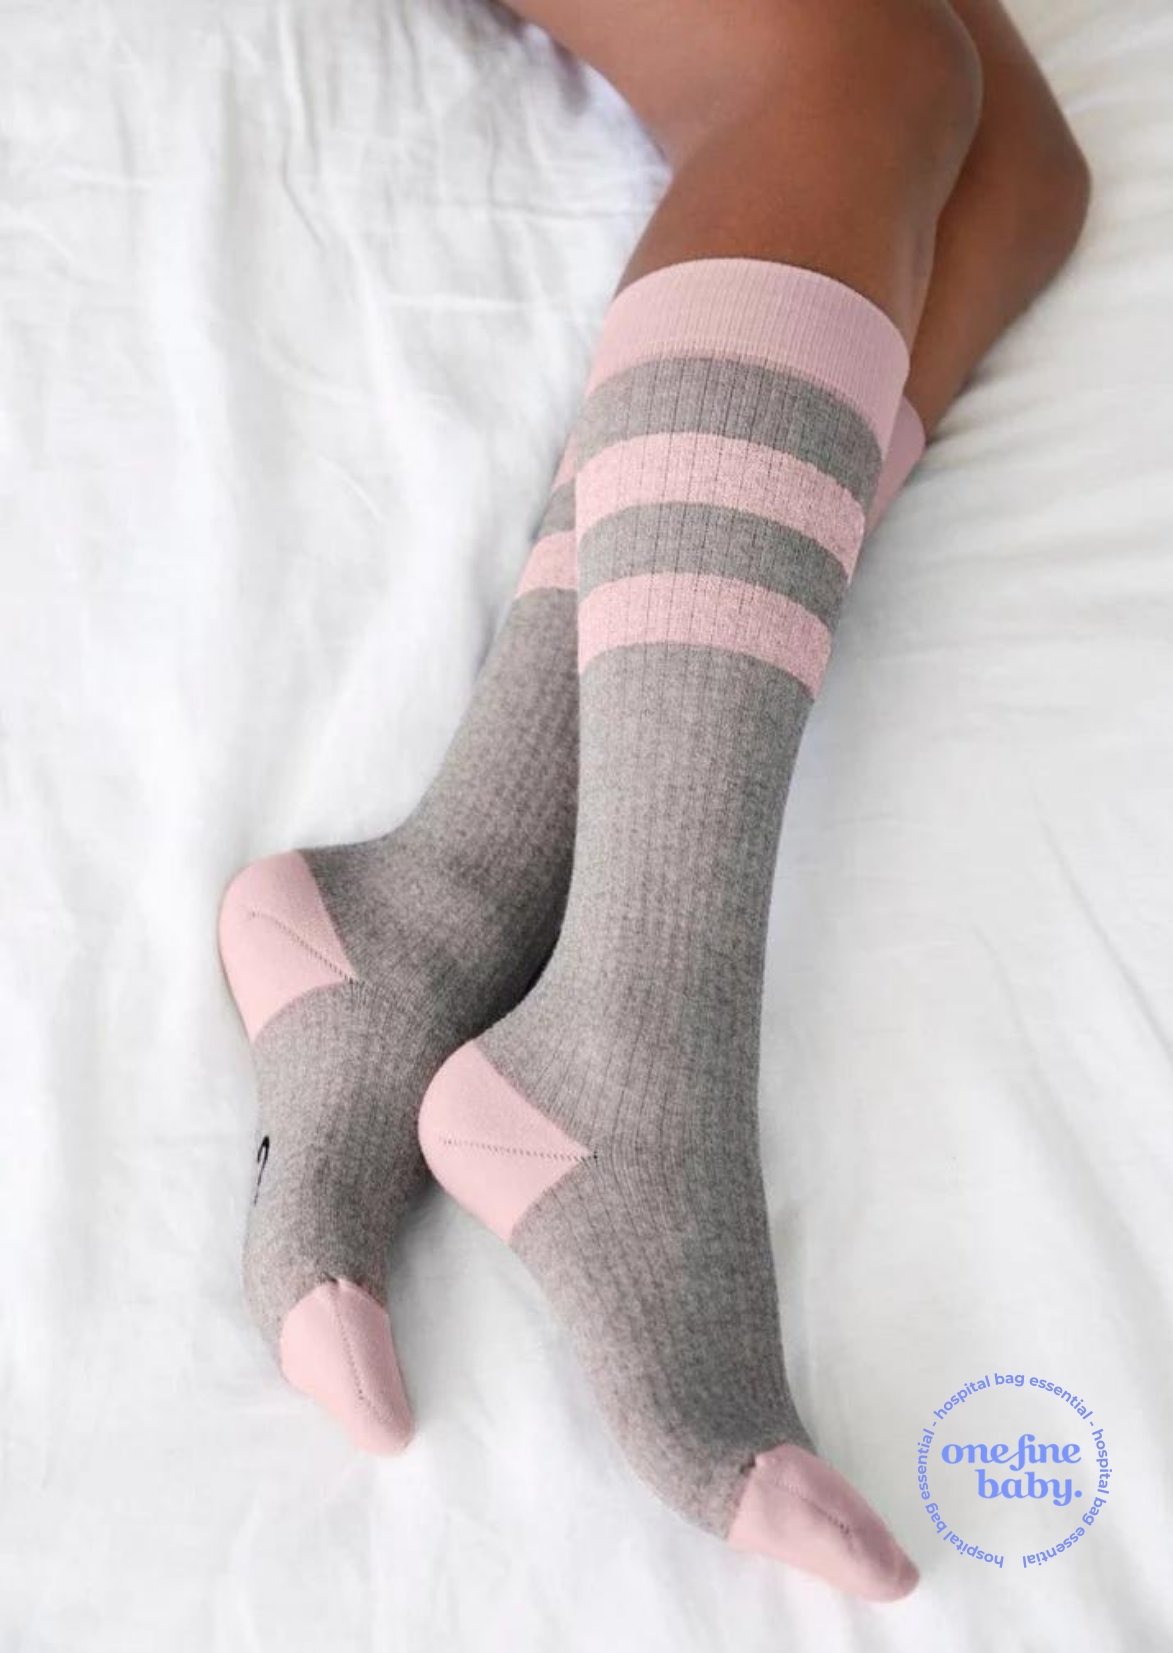 Thery Light Grey Marle/Pink Marshmallow The Comforter Maternity Compression Socks - side view one fine baby hospital bag list